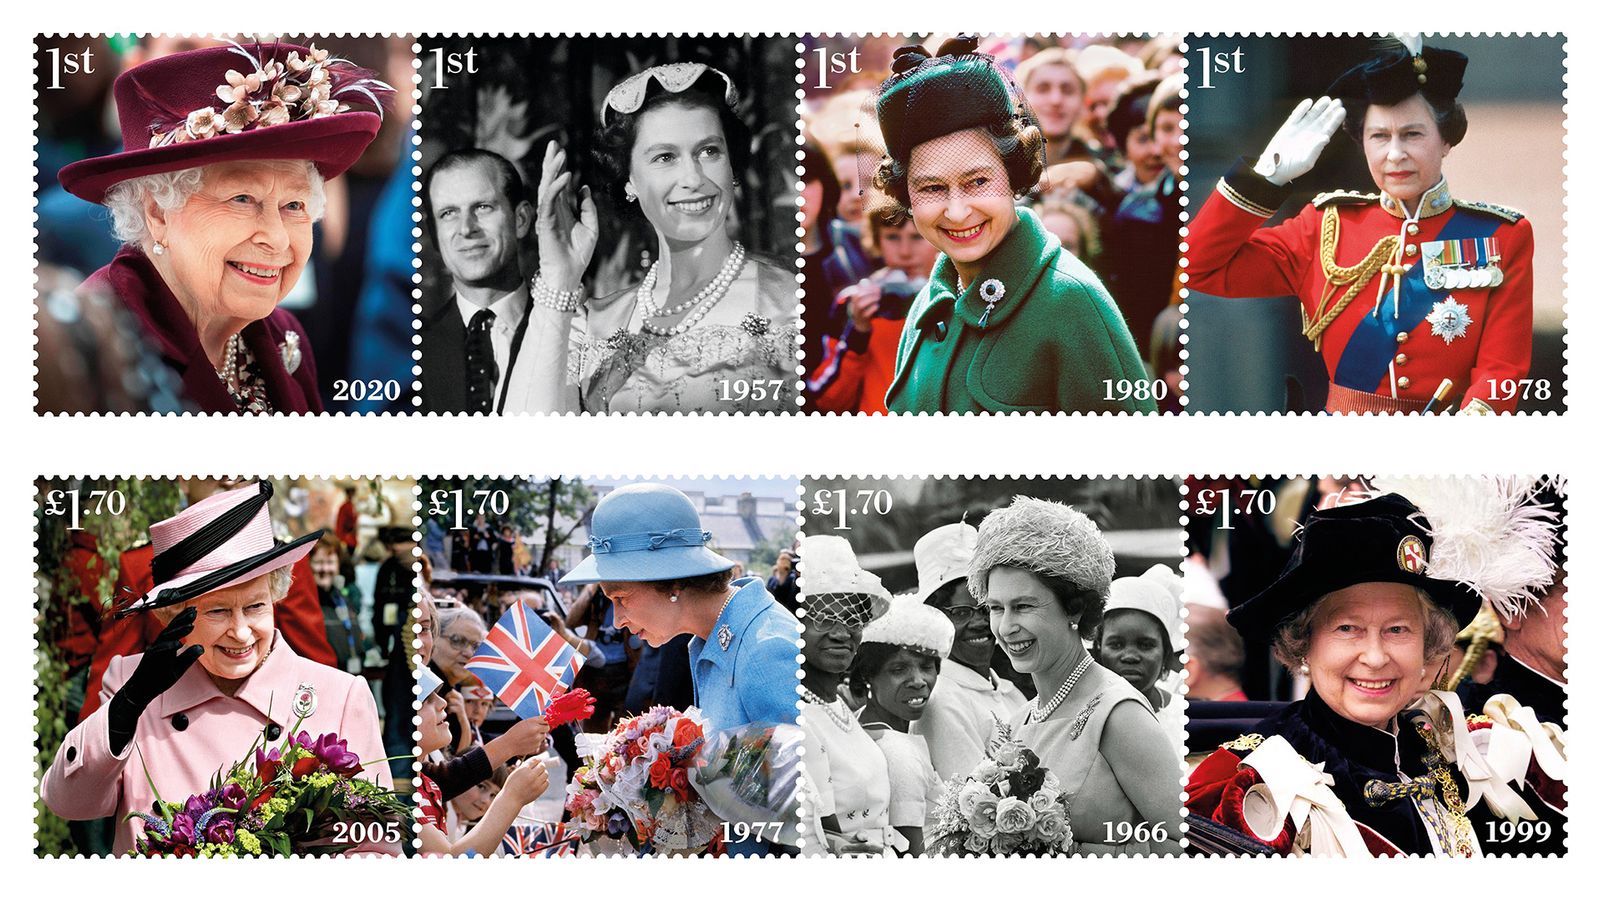 The 2022 GB stamps to mark the 70th anniversary of the Queen's accession to the throne. Image: Royal Mail